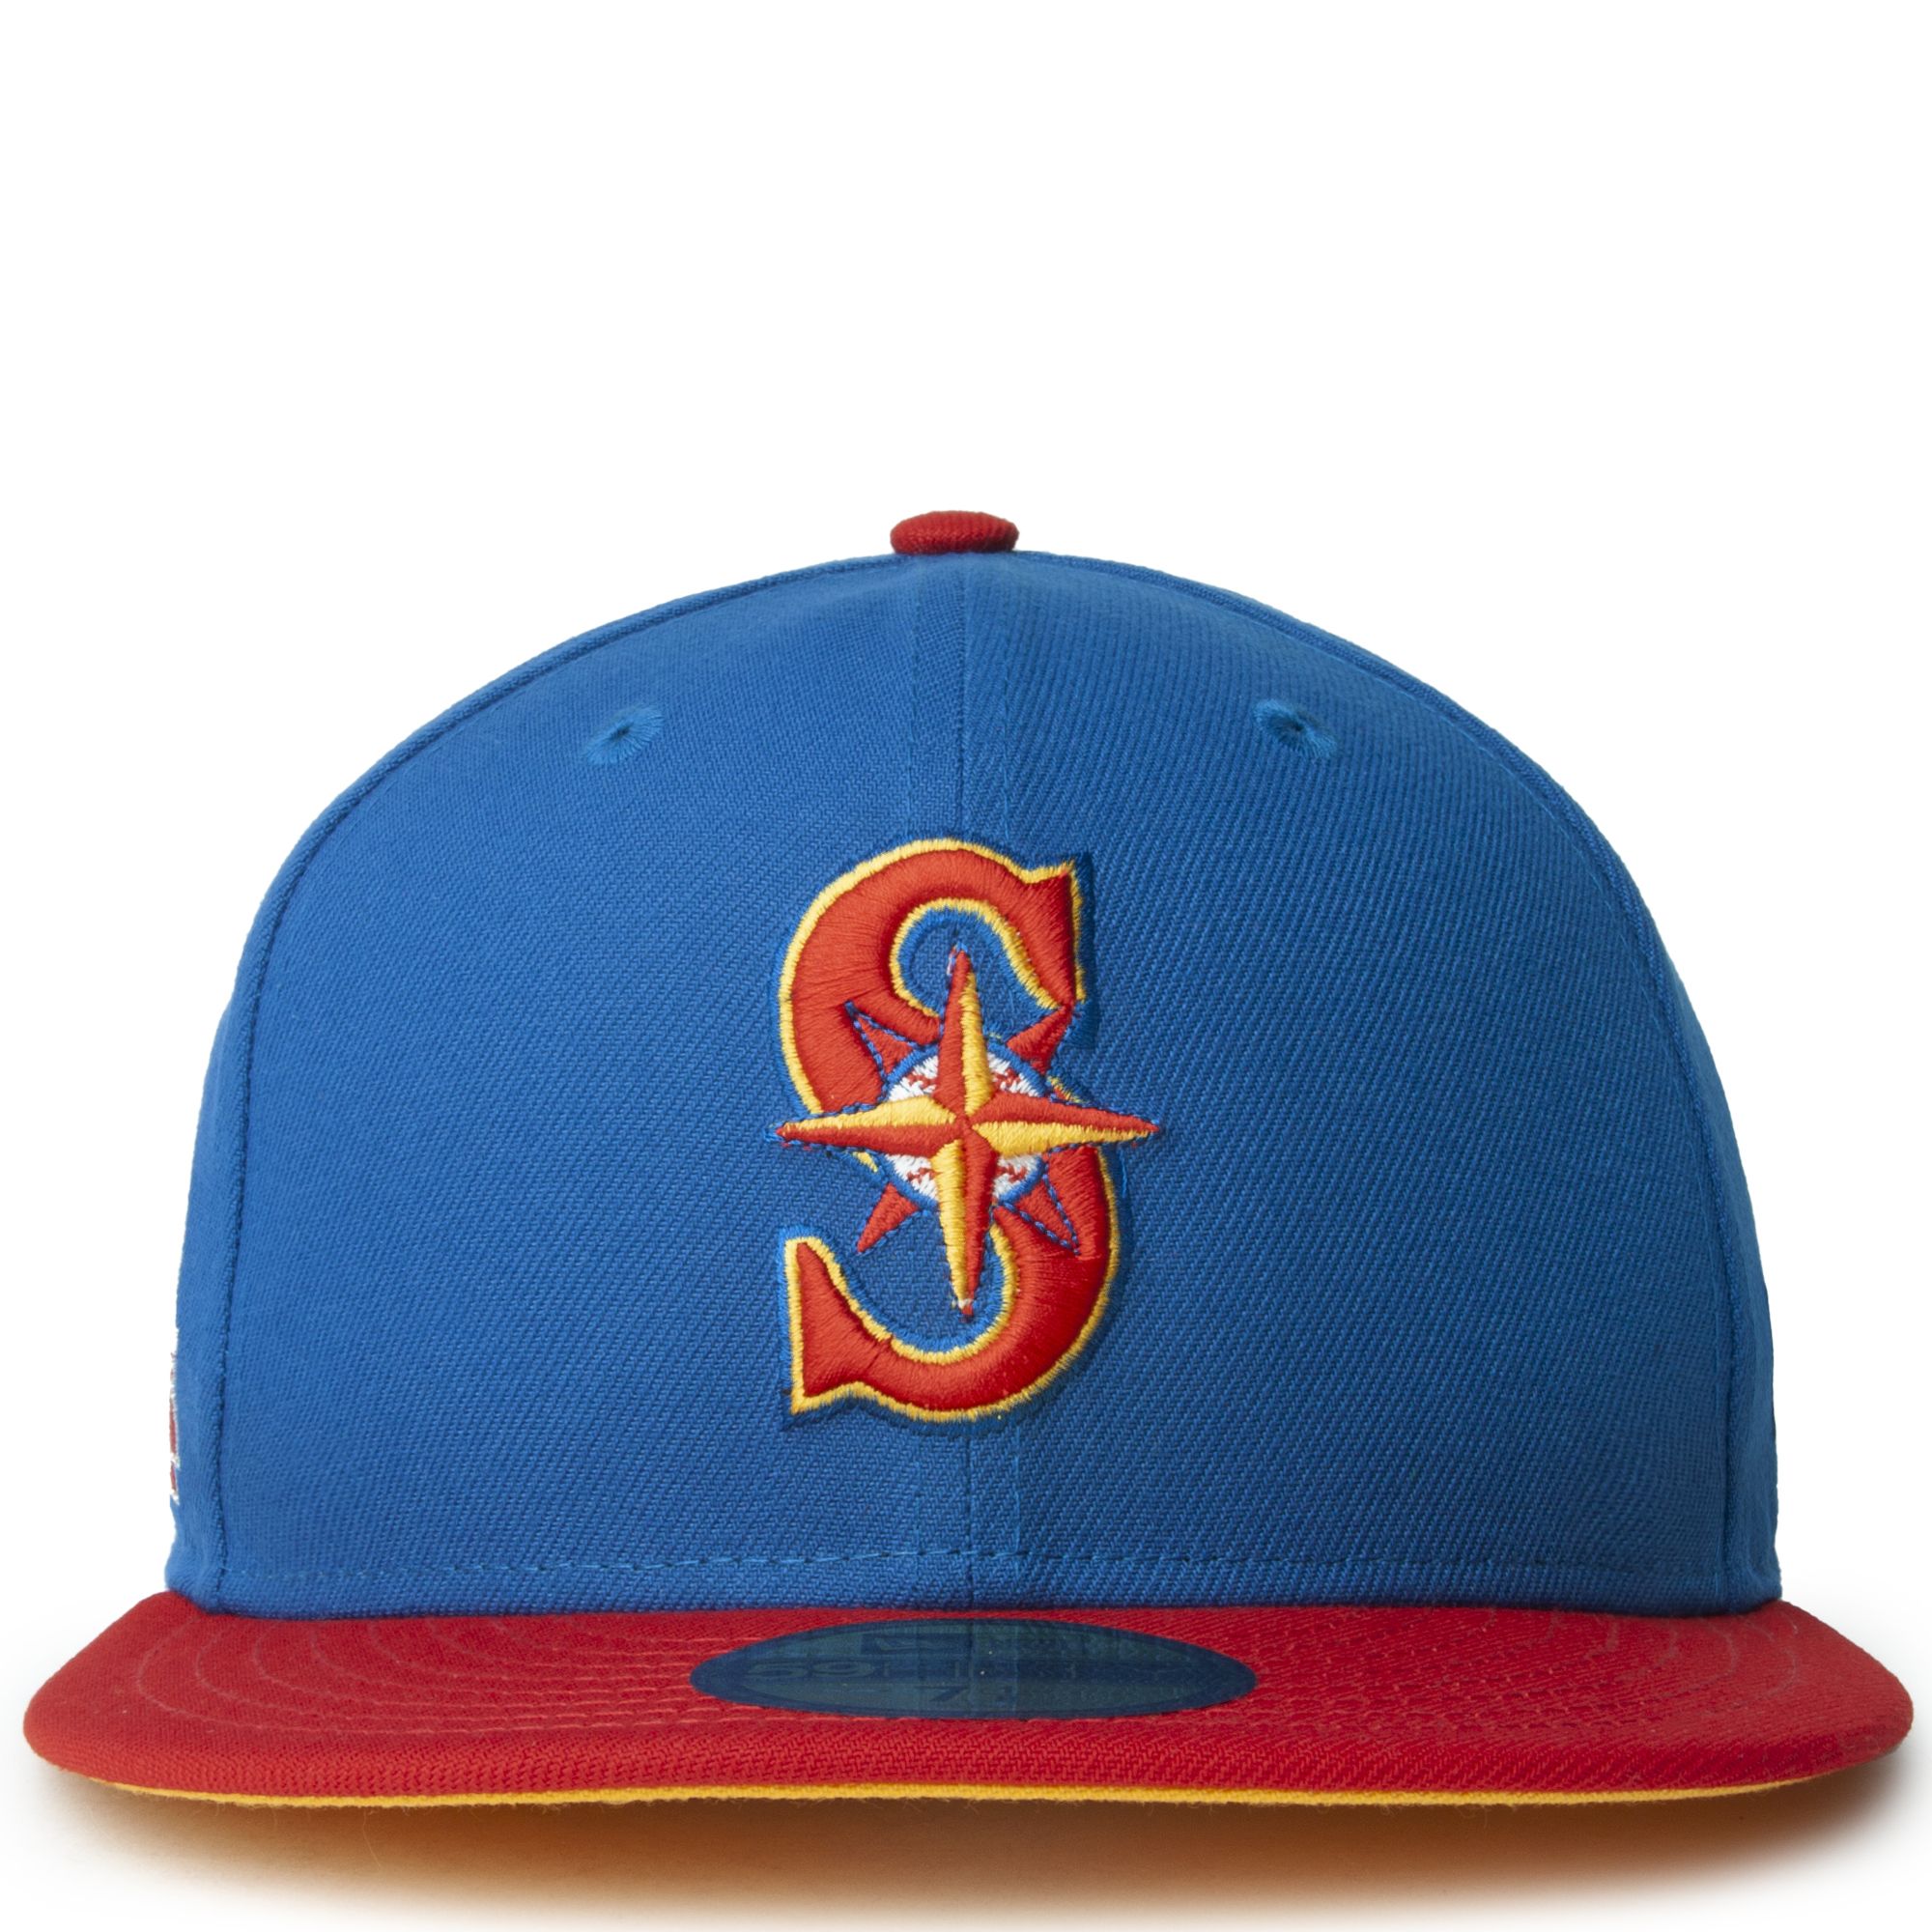 New Era Caps Seattle Mariners Blue Red 59FIFTY Fitted Cap Blue/Gold